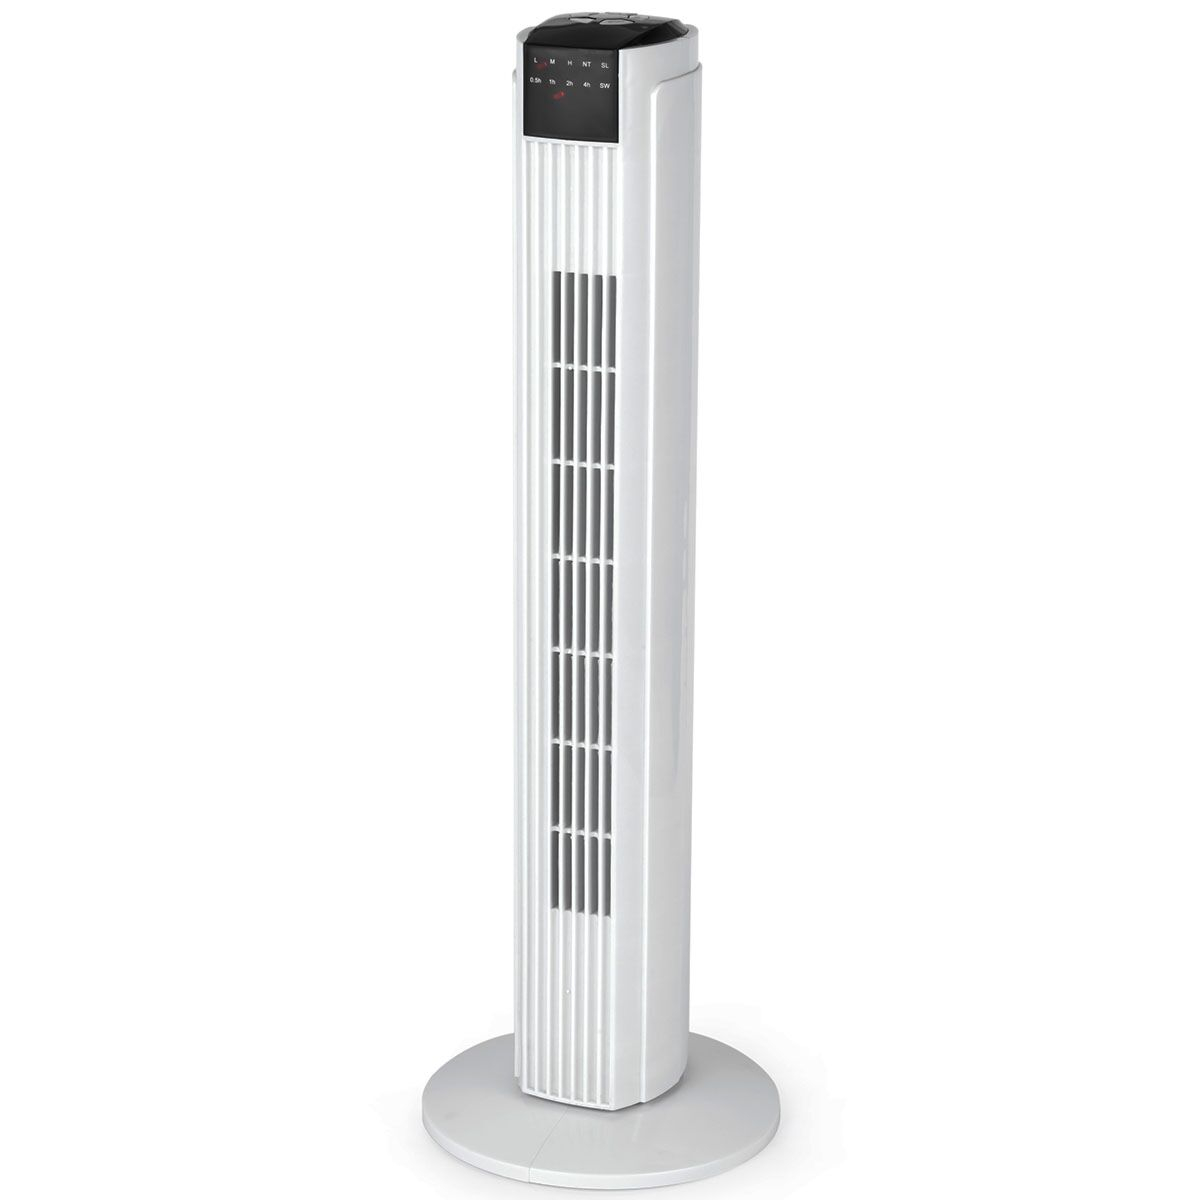 Beldray 32 Tower Fan With Remote White intended for size 1200 X 1200